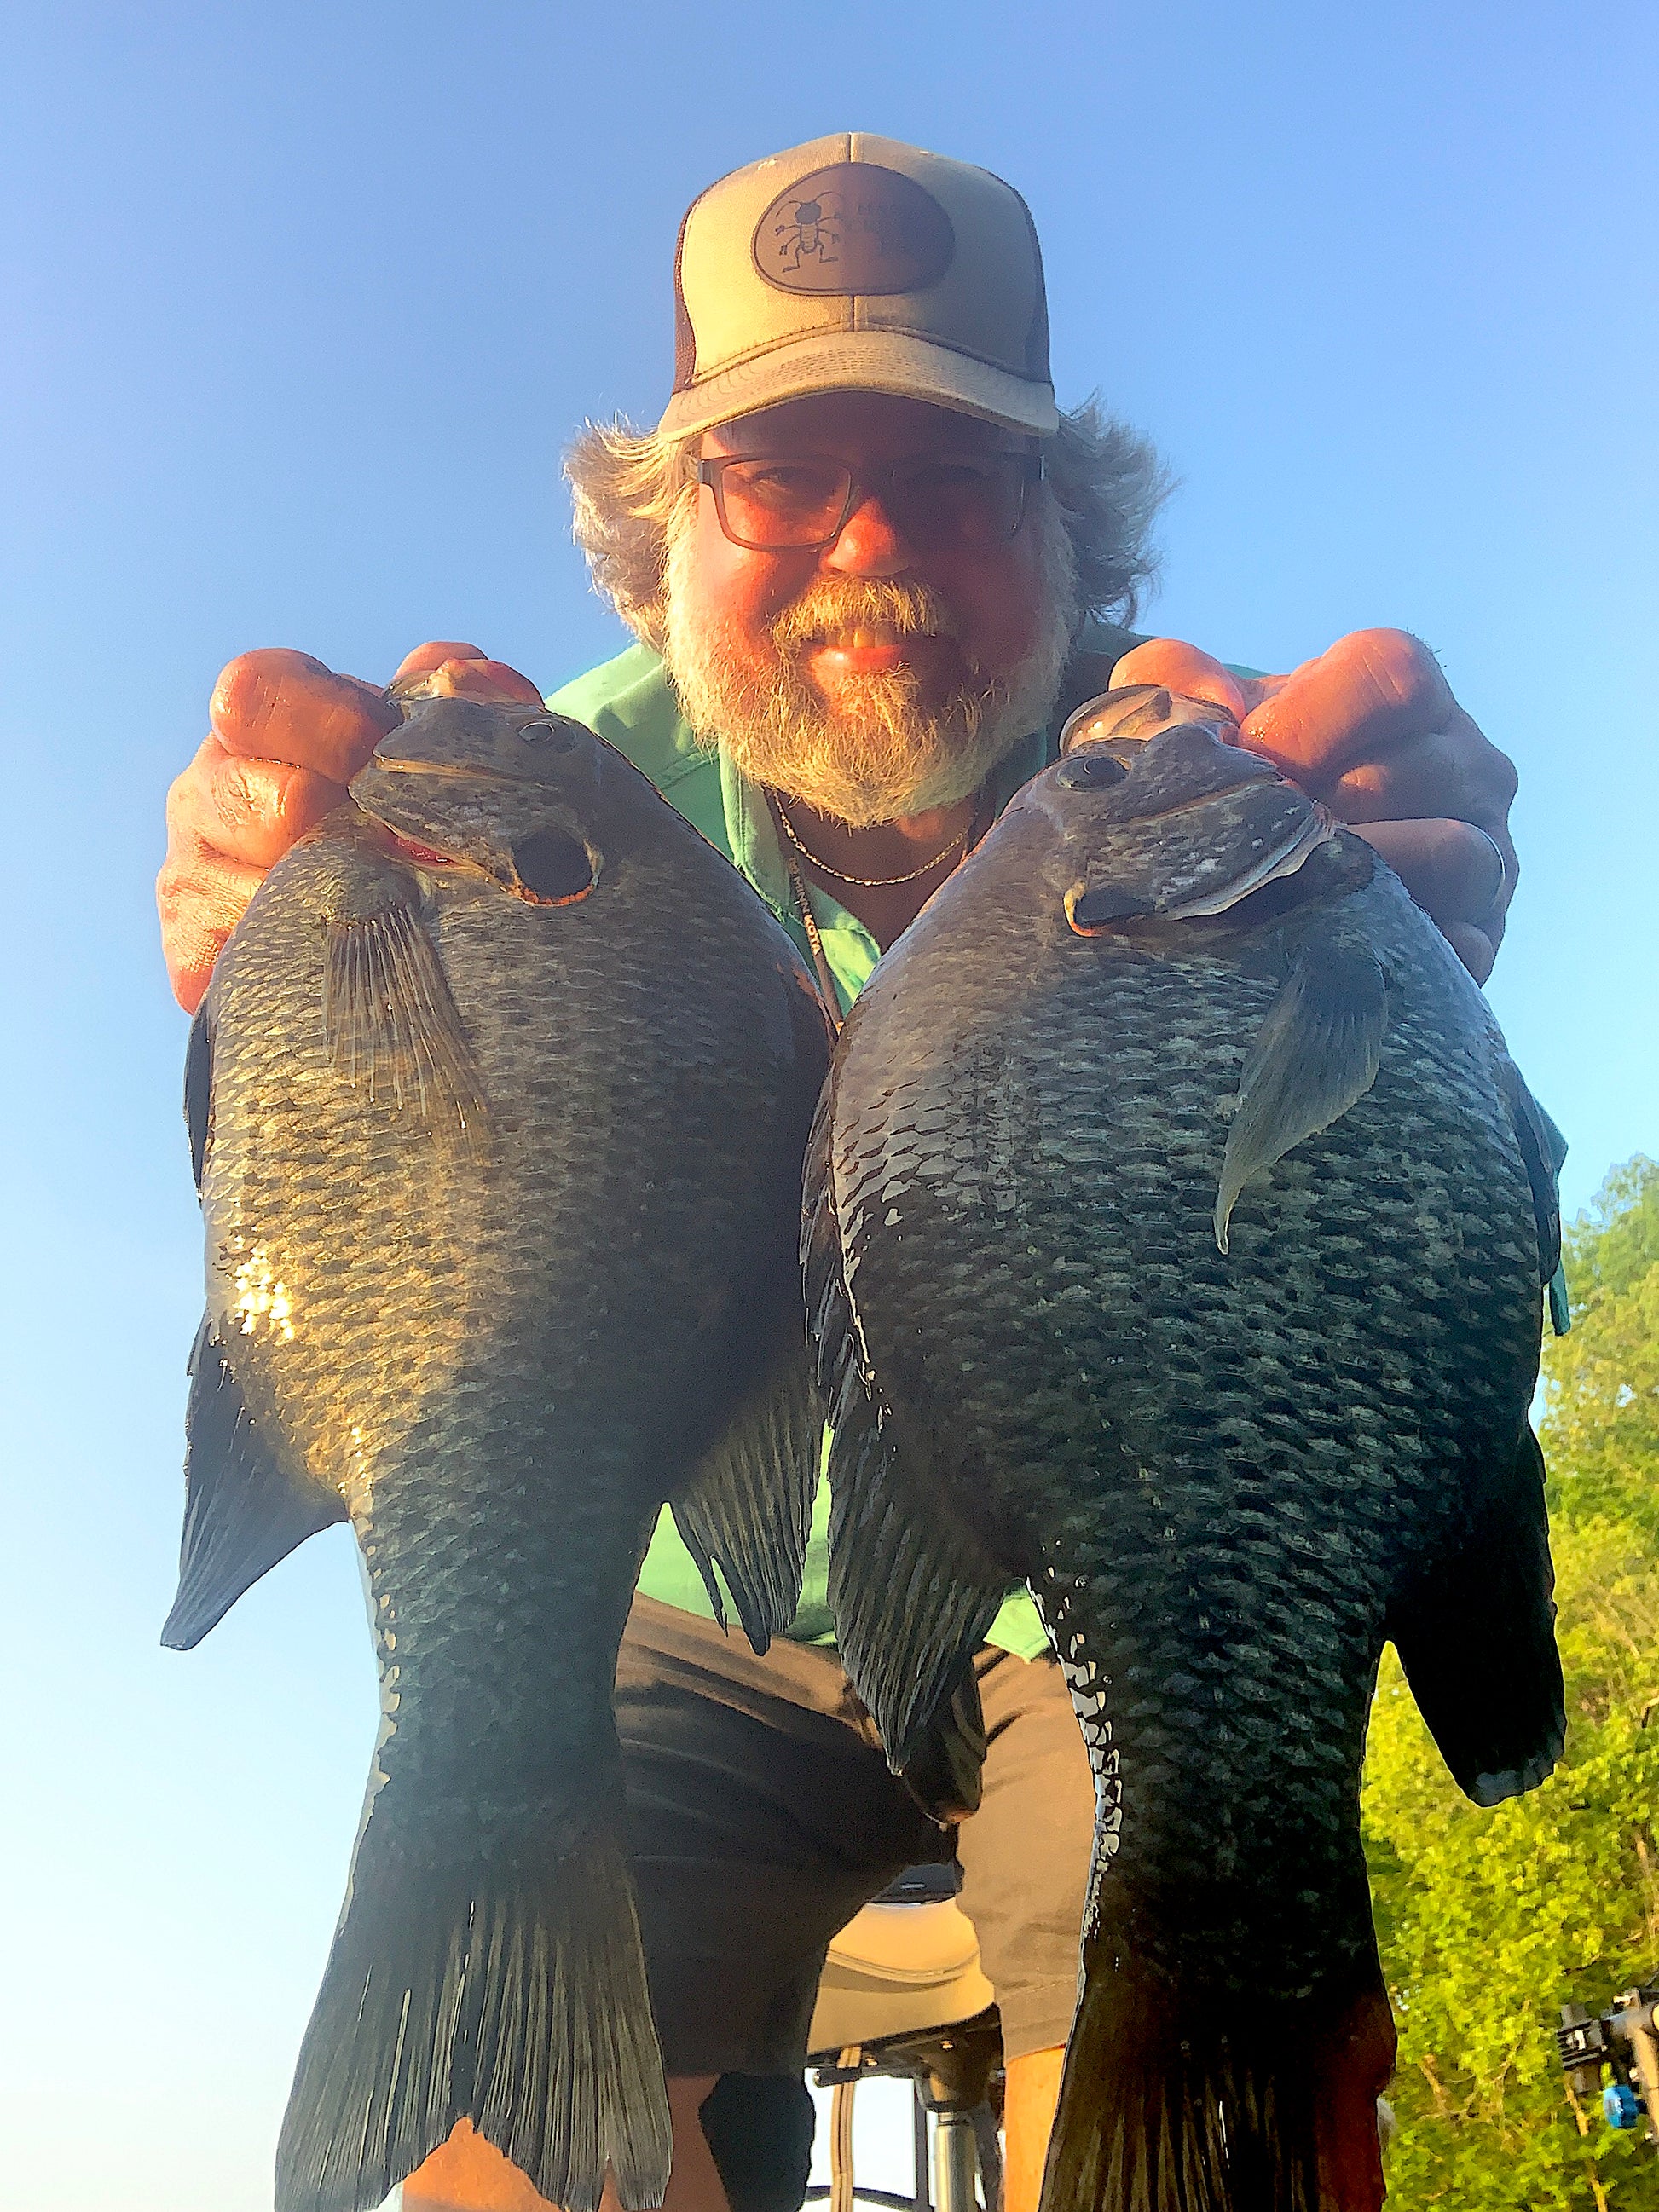 Hairy Cricket Jig A jig to catch bluegills, shellcrackers and crappie. –  Rambling Angler Outdoor Products